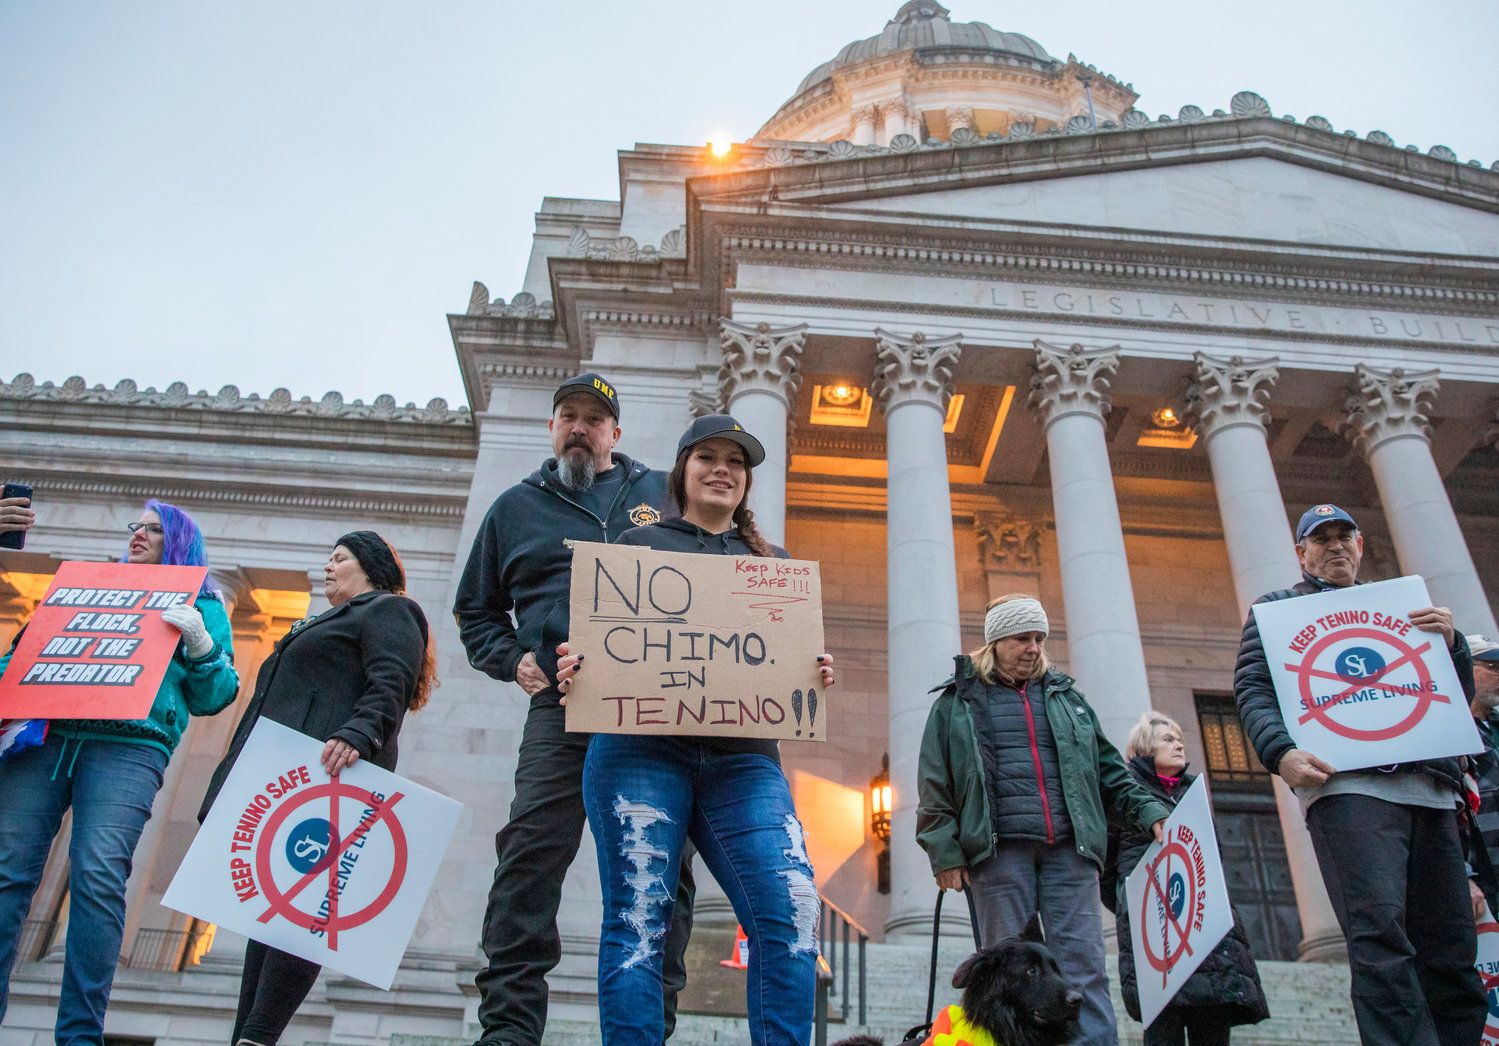 Tenino area residents gather outside the Washington State Capitol building in Olympia while holding signs and protesting Supreme Living in late January.